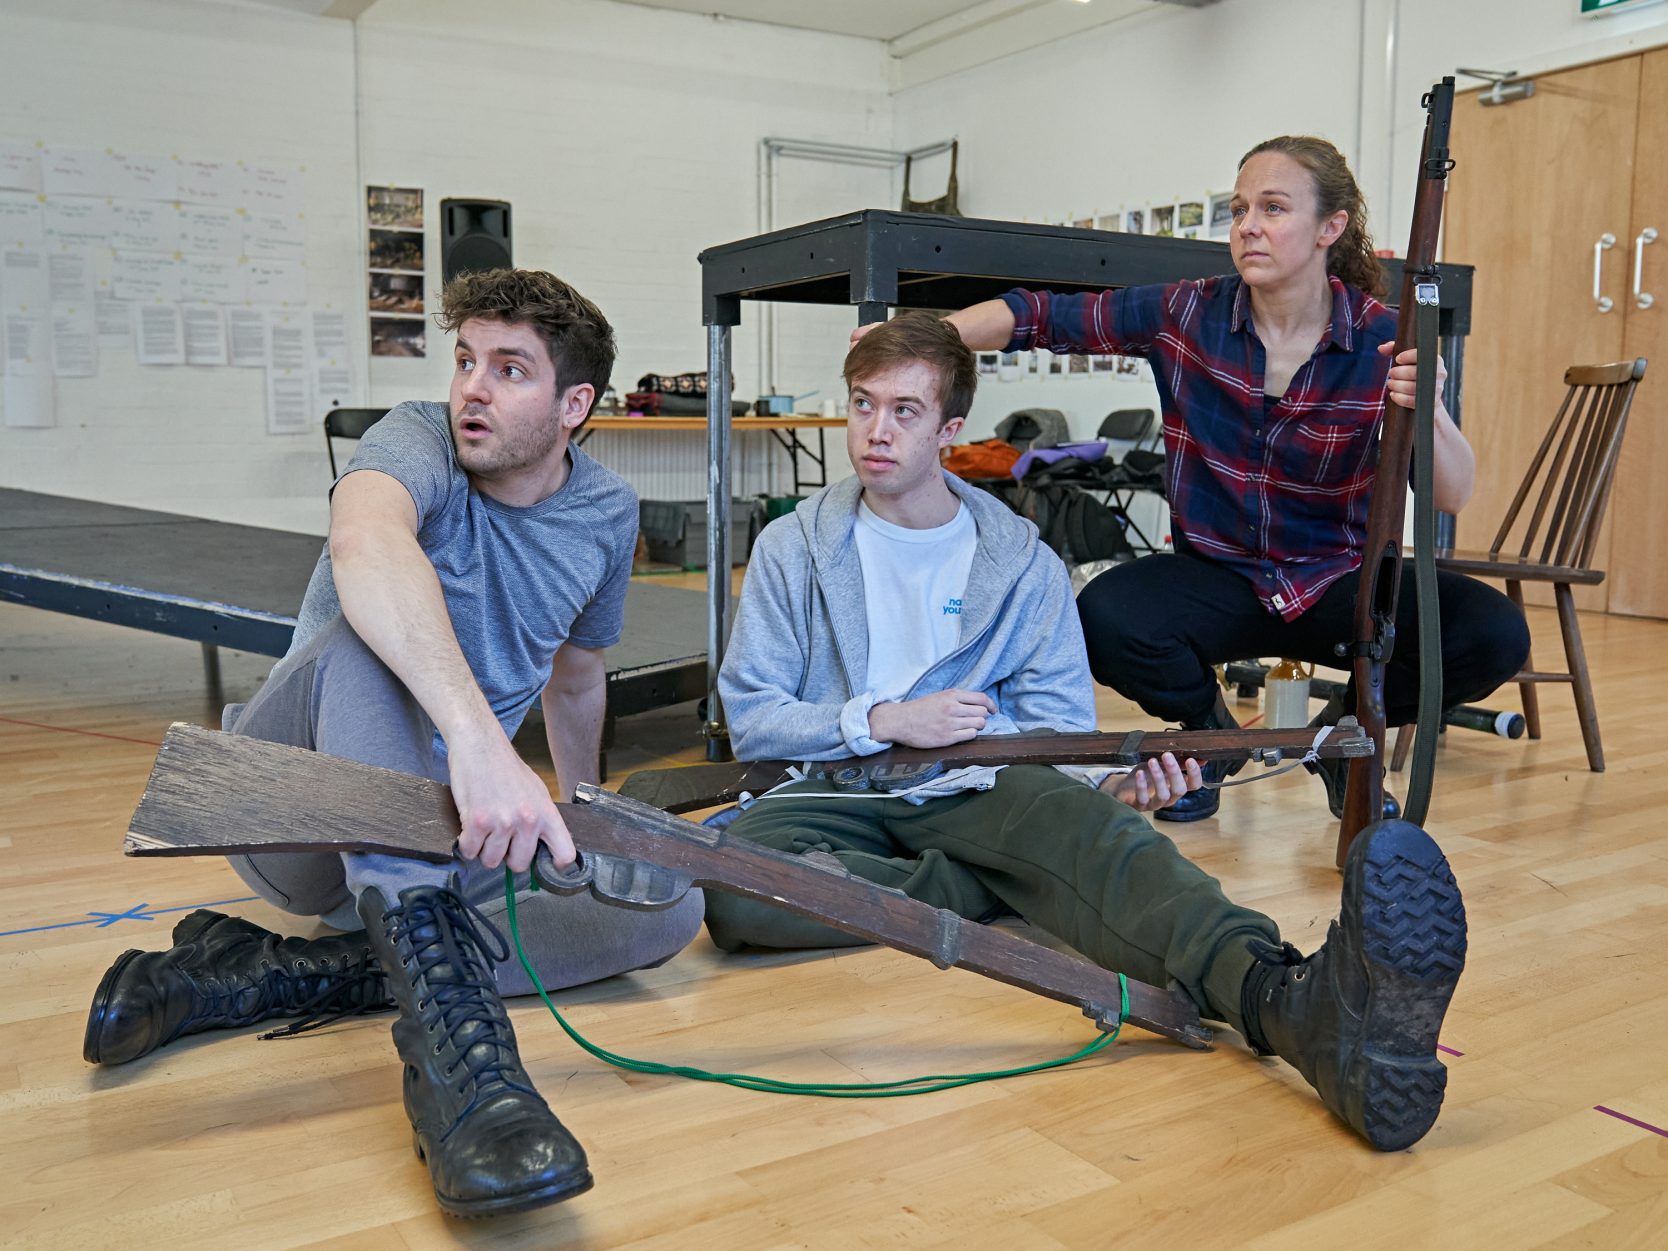 The cast in rehearsals in early 2020. Photo Credit: Manuel Harlan